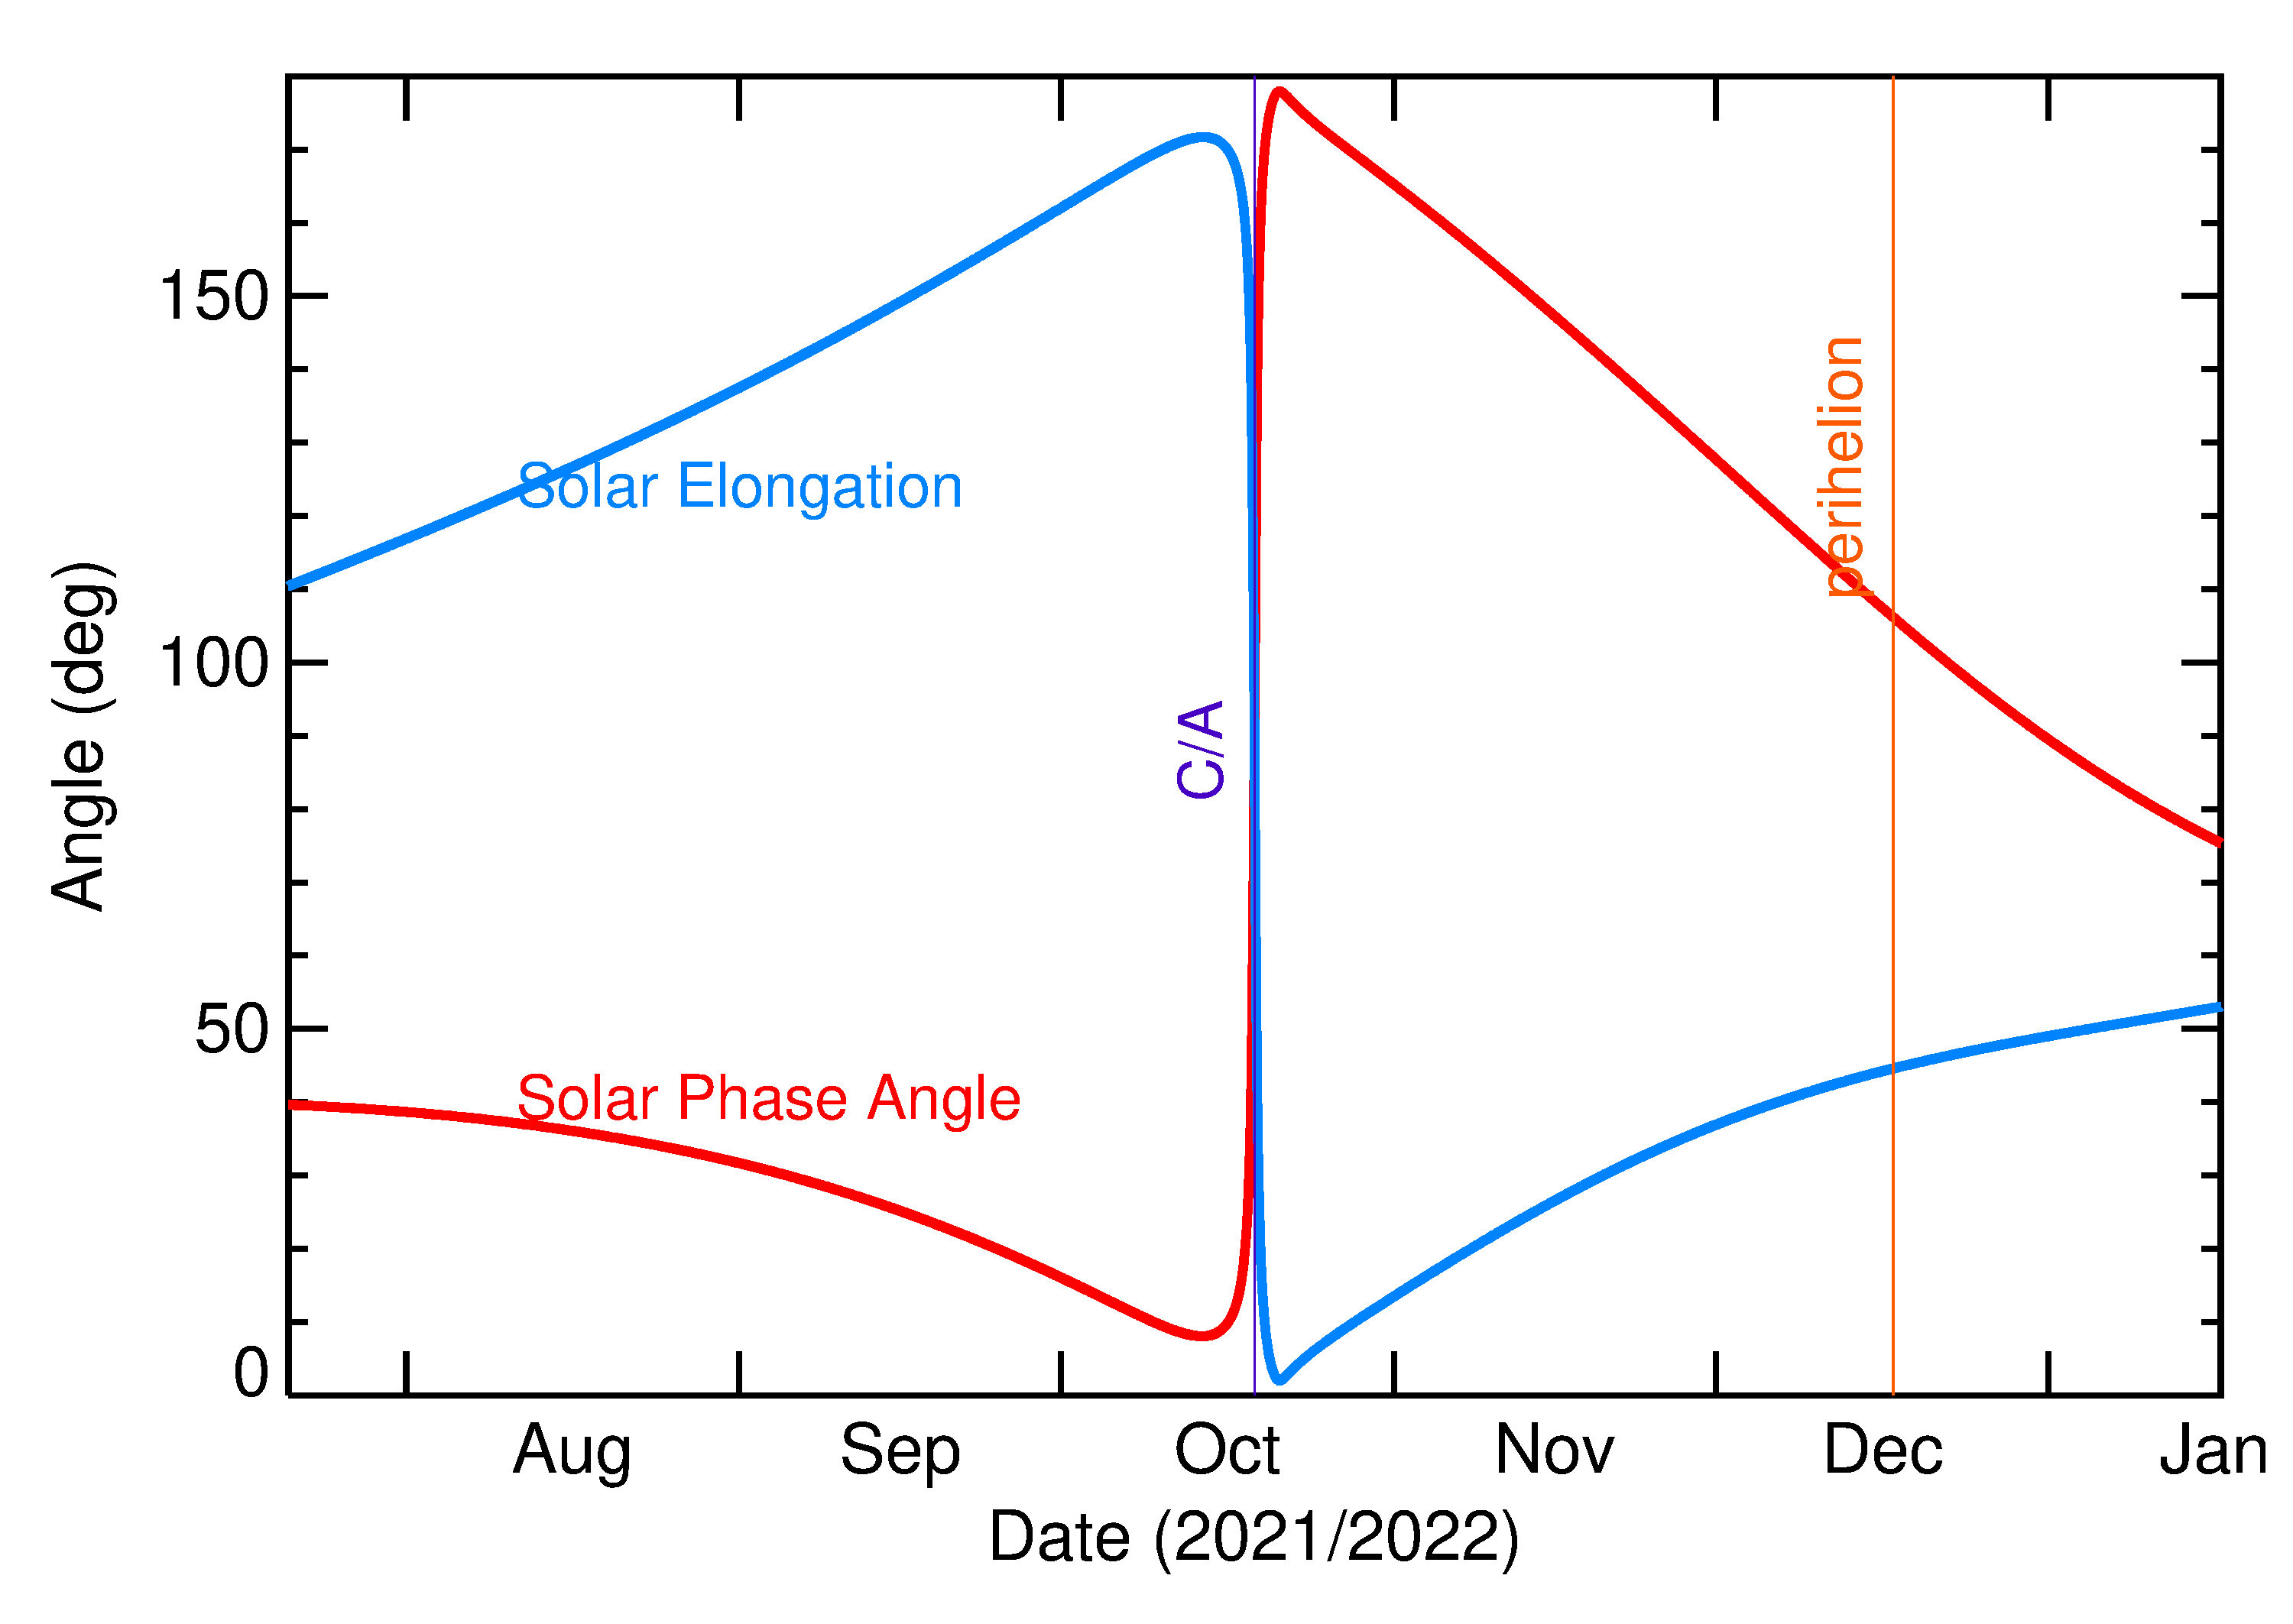 Solar Elongation and Solar Phase Angle of 2021 TG14 in the months around closest approach